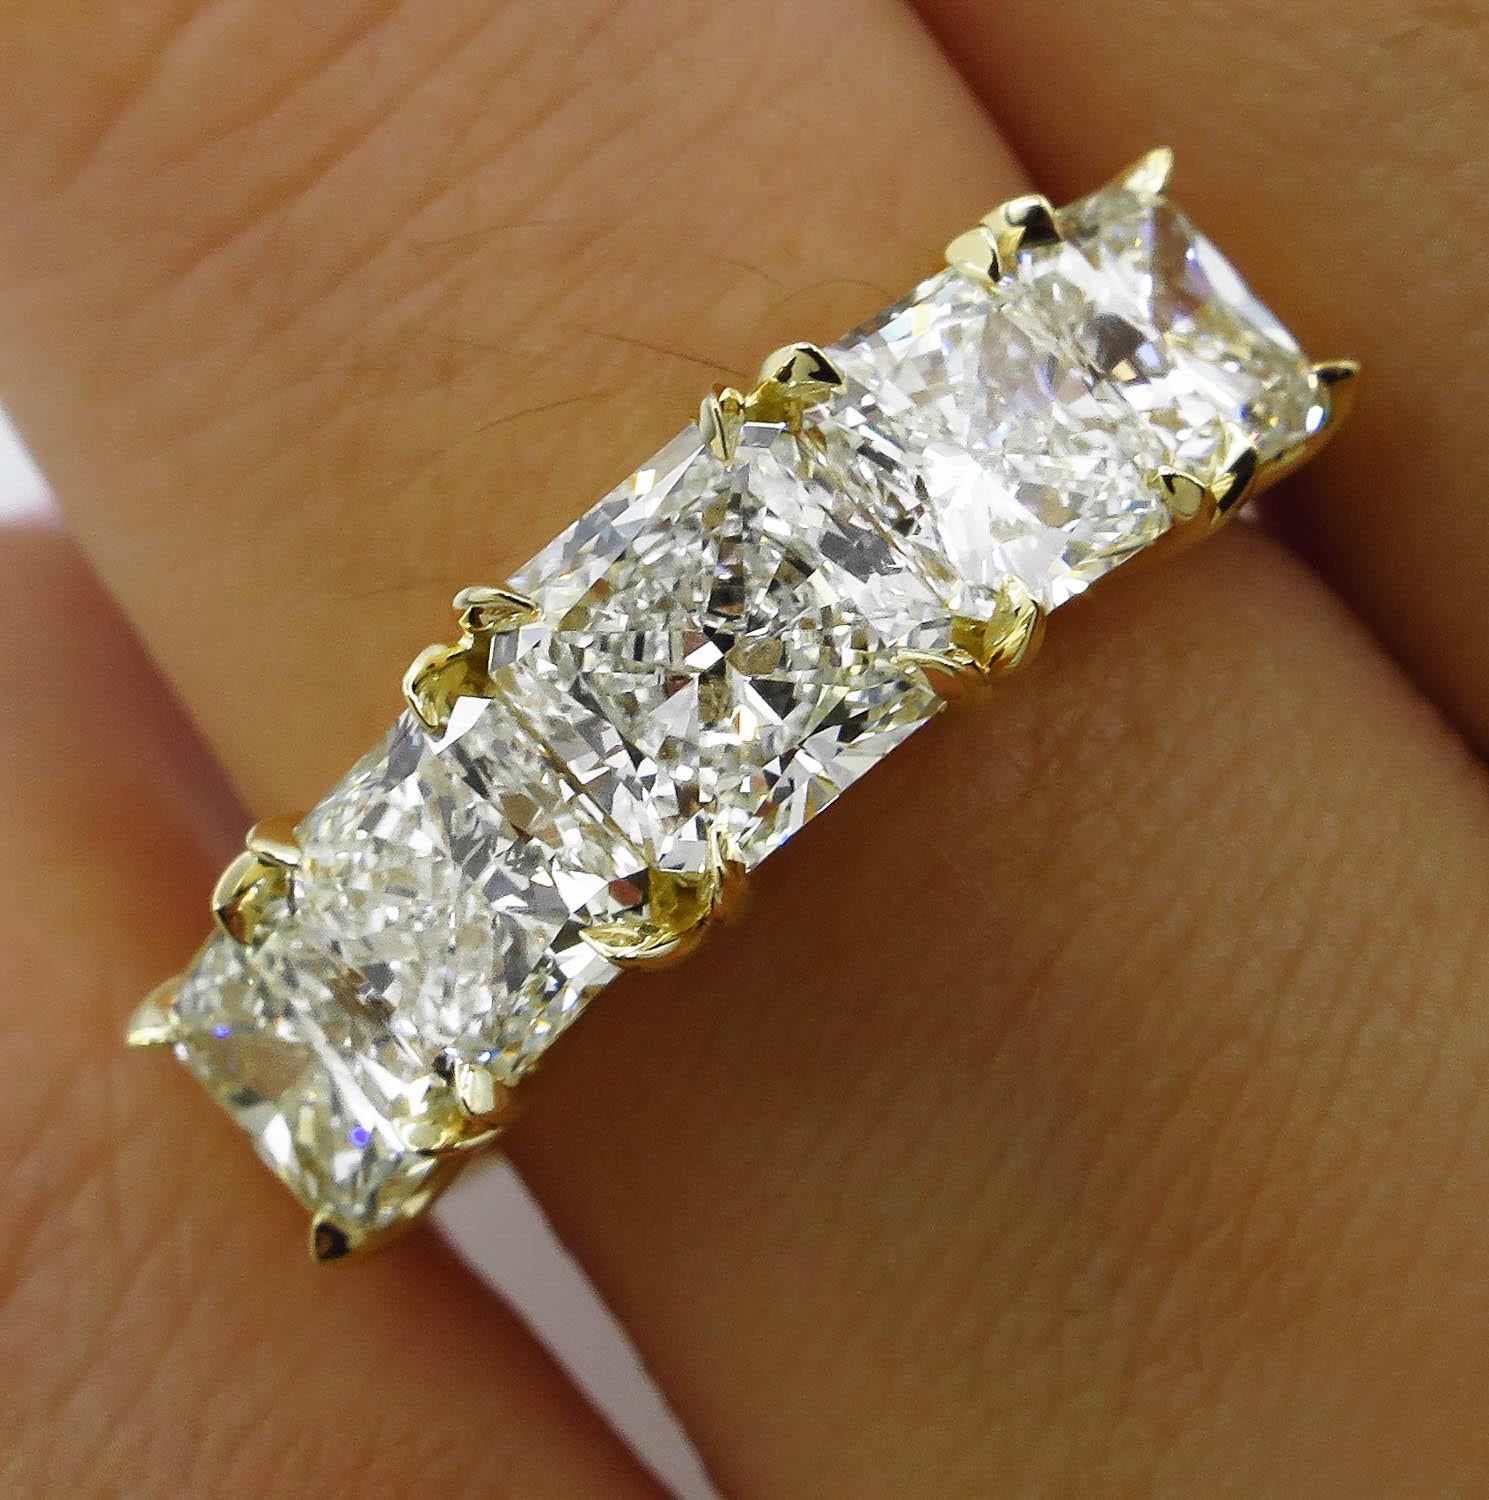 A Breathtaking Vintage HANDMADE 18k Yellow Gold (stamped) Diamond 5 Stone Engagement Wedding band ring. The Prong Set Radiant Cut Diamond is 1.03CT; GEMOLOGIC Certified in J-K color VS1-VS2 clarity (Very Clear).
It is set with 4 Large Radiant cut